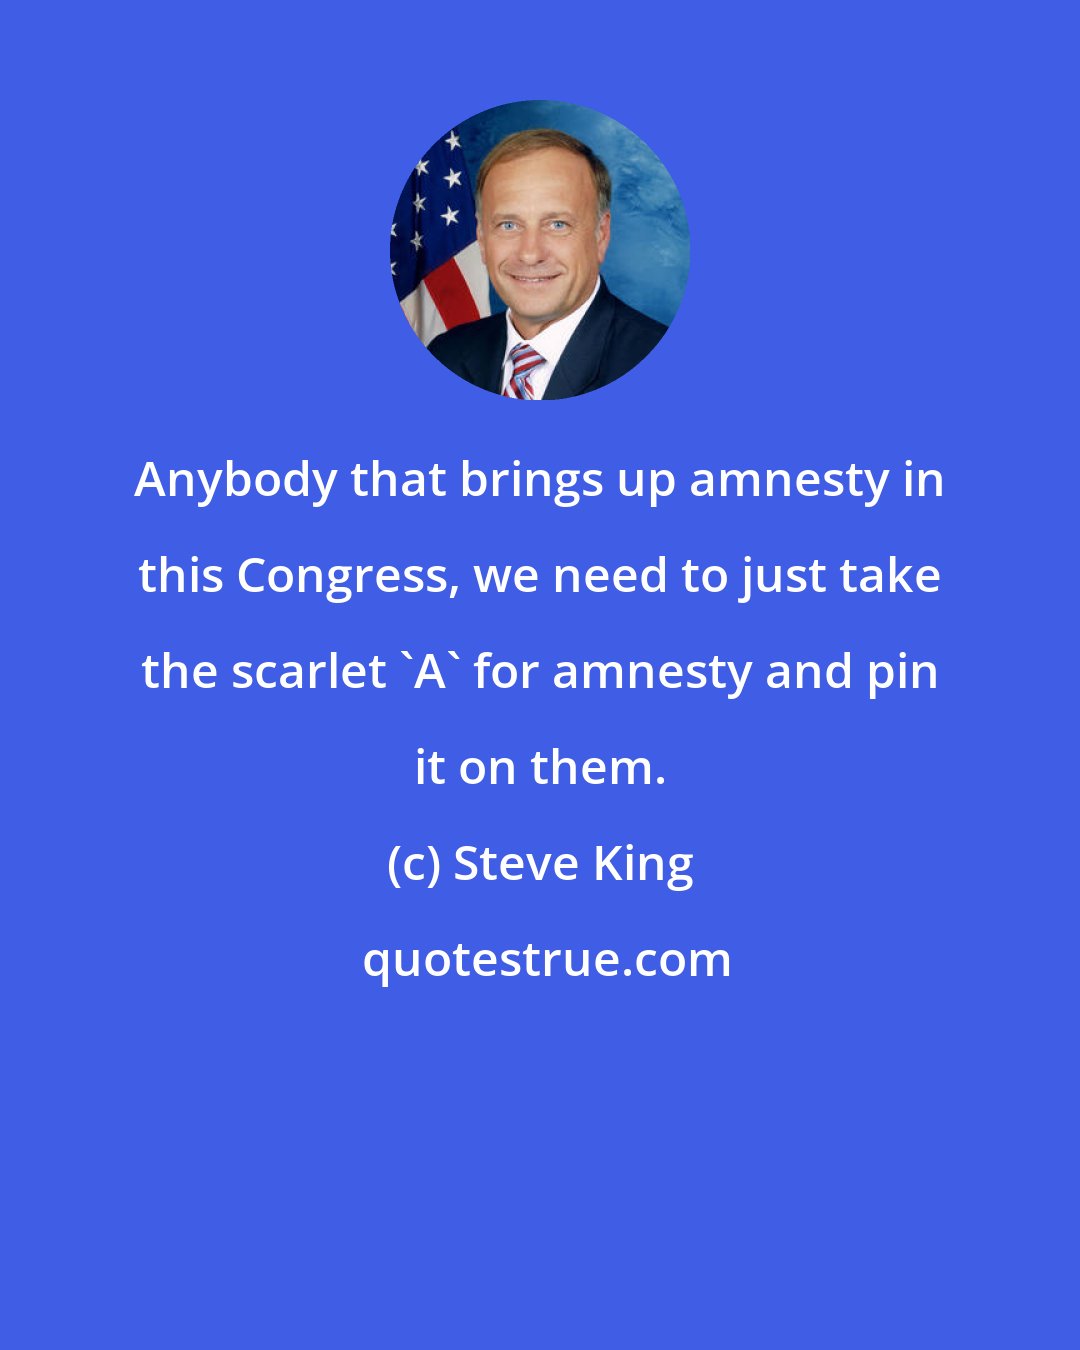 Steve King: Anybody that brings up amnesty in this Congress, we need to just take the scarlet 'A' for amnesty and pin it on them.